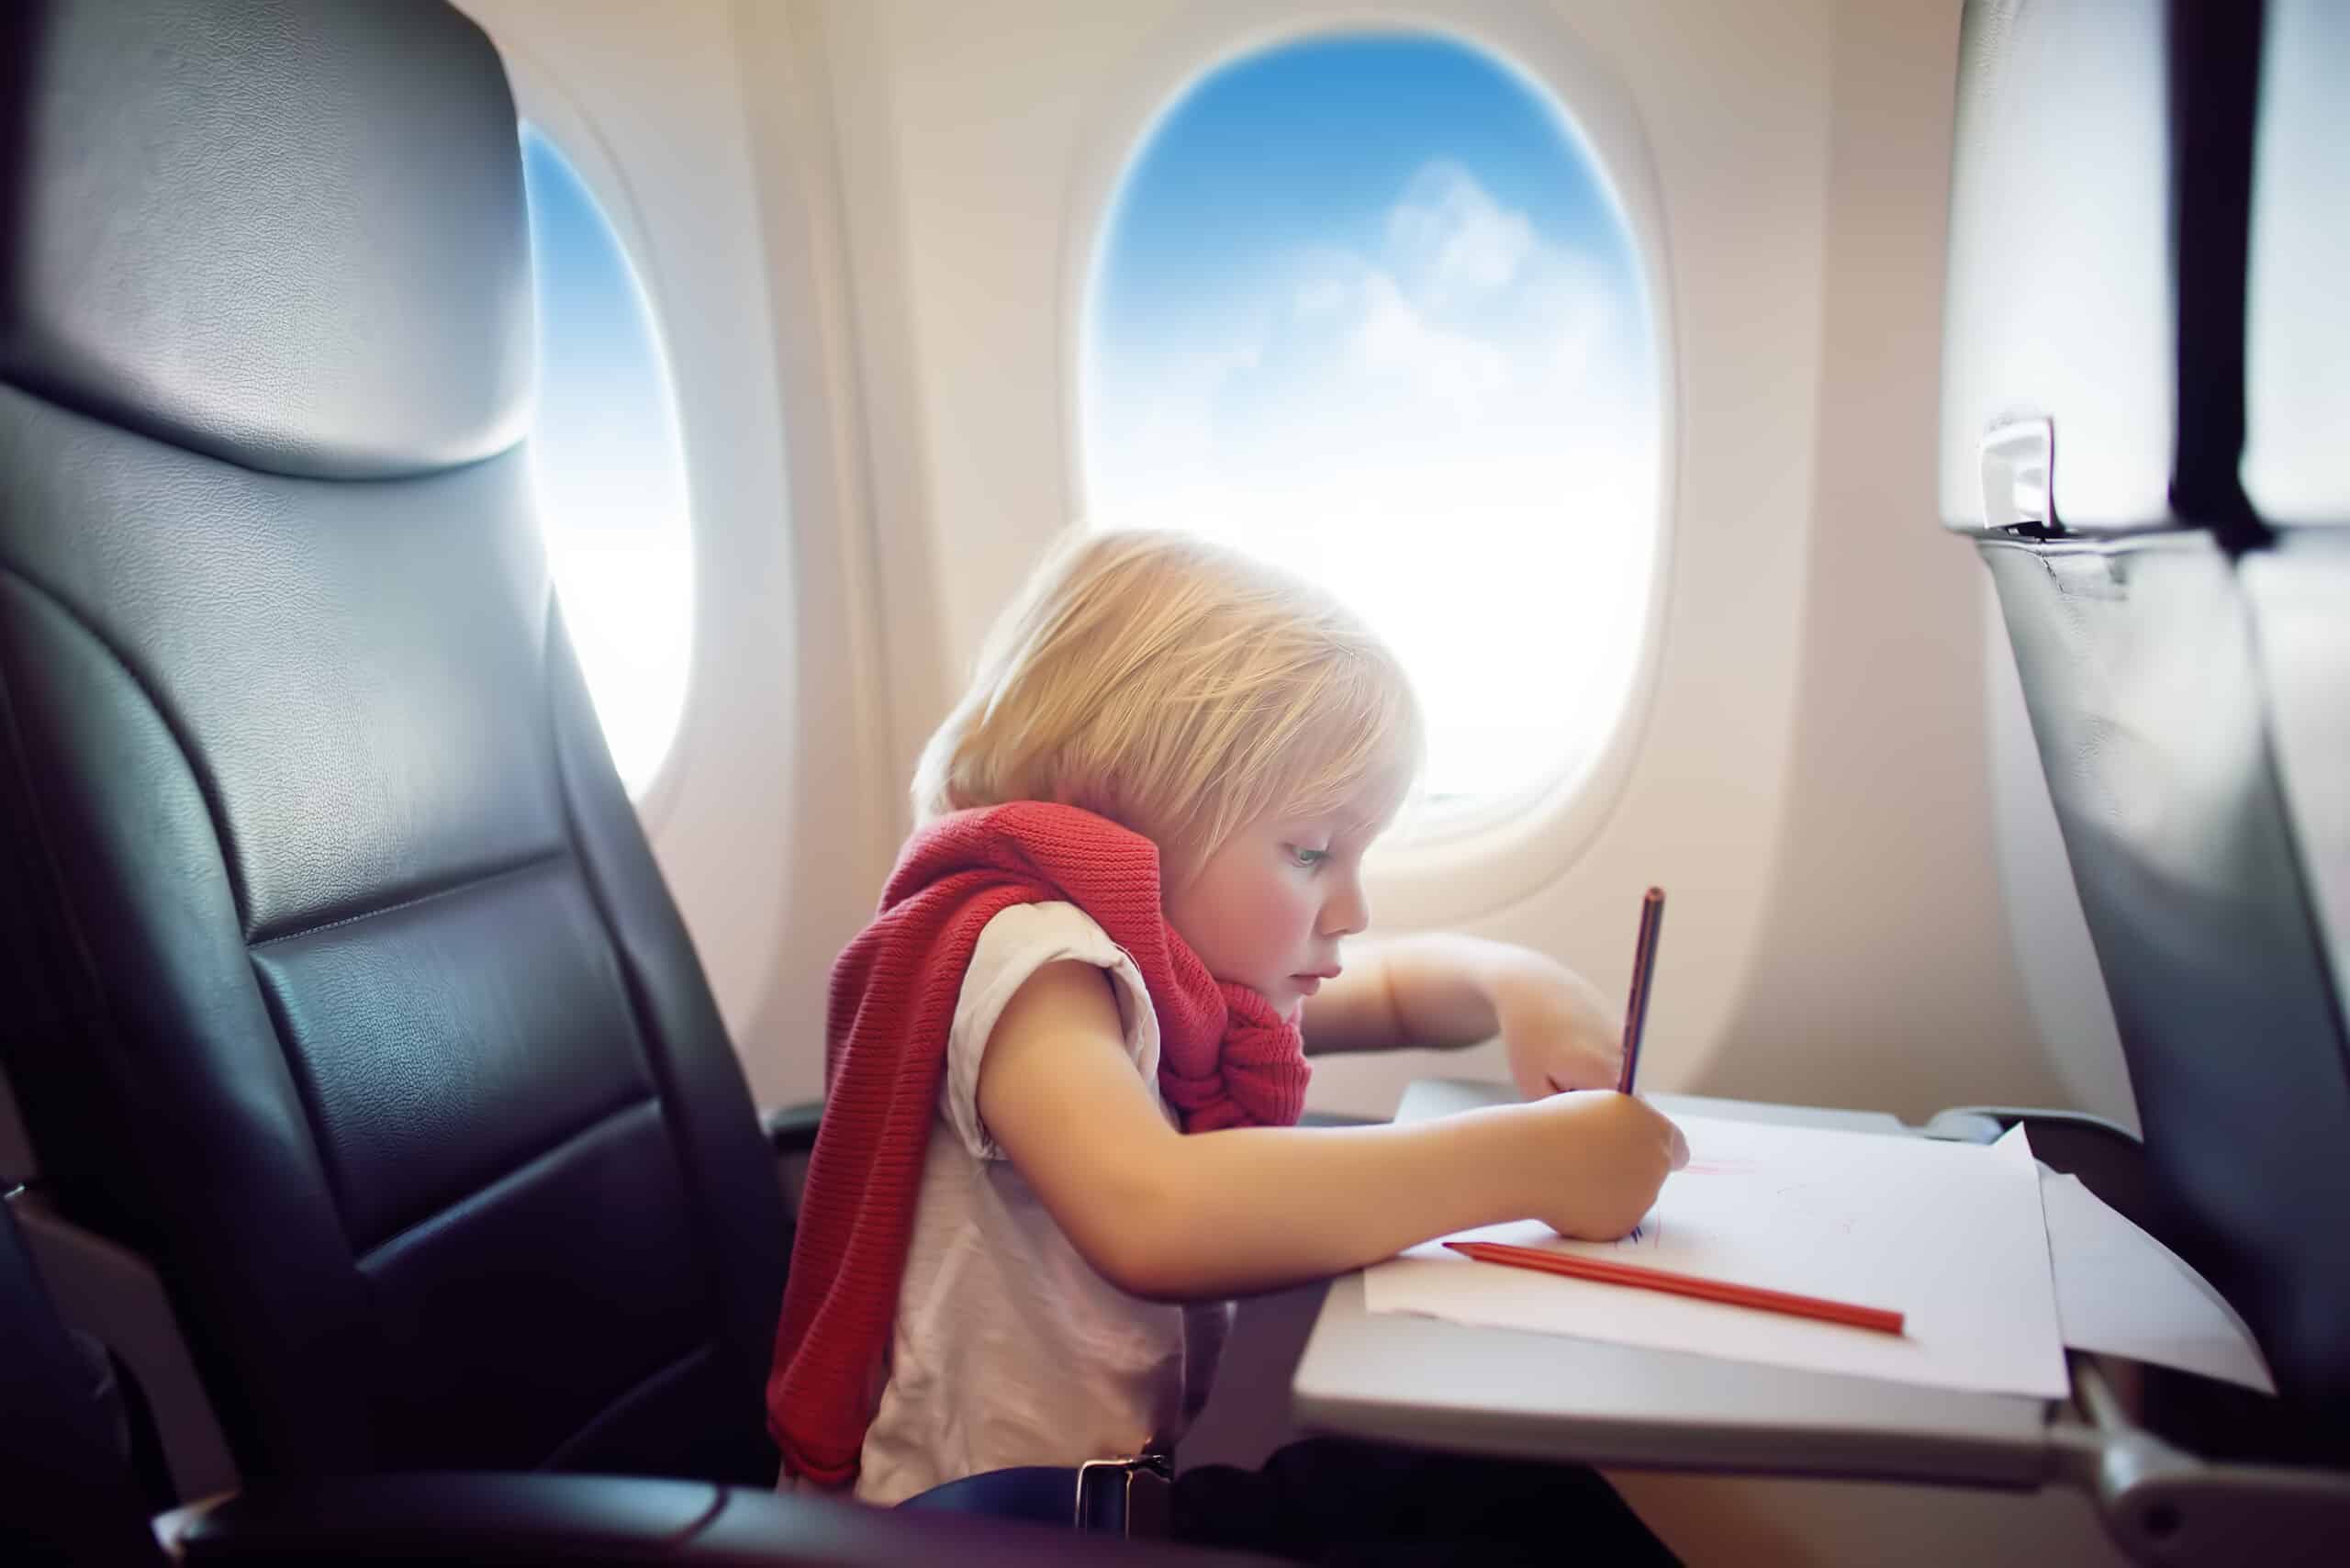 Tips for travelling with toddlers on long-haul flights